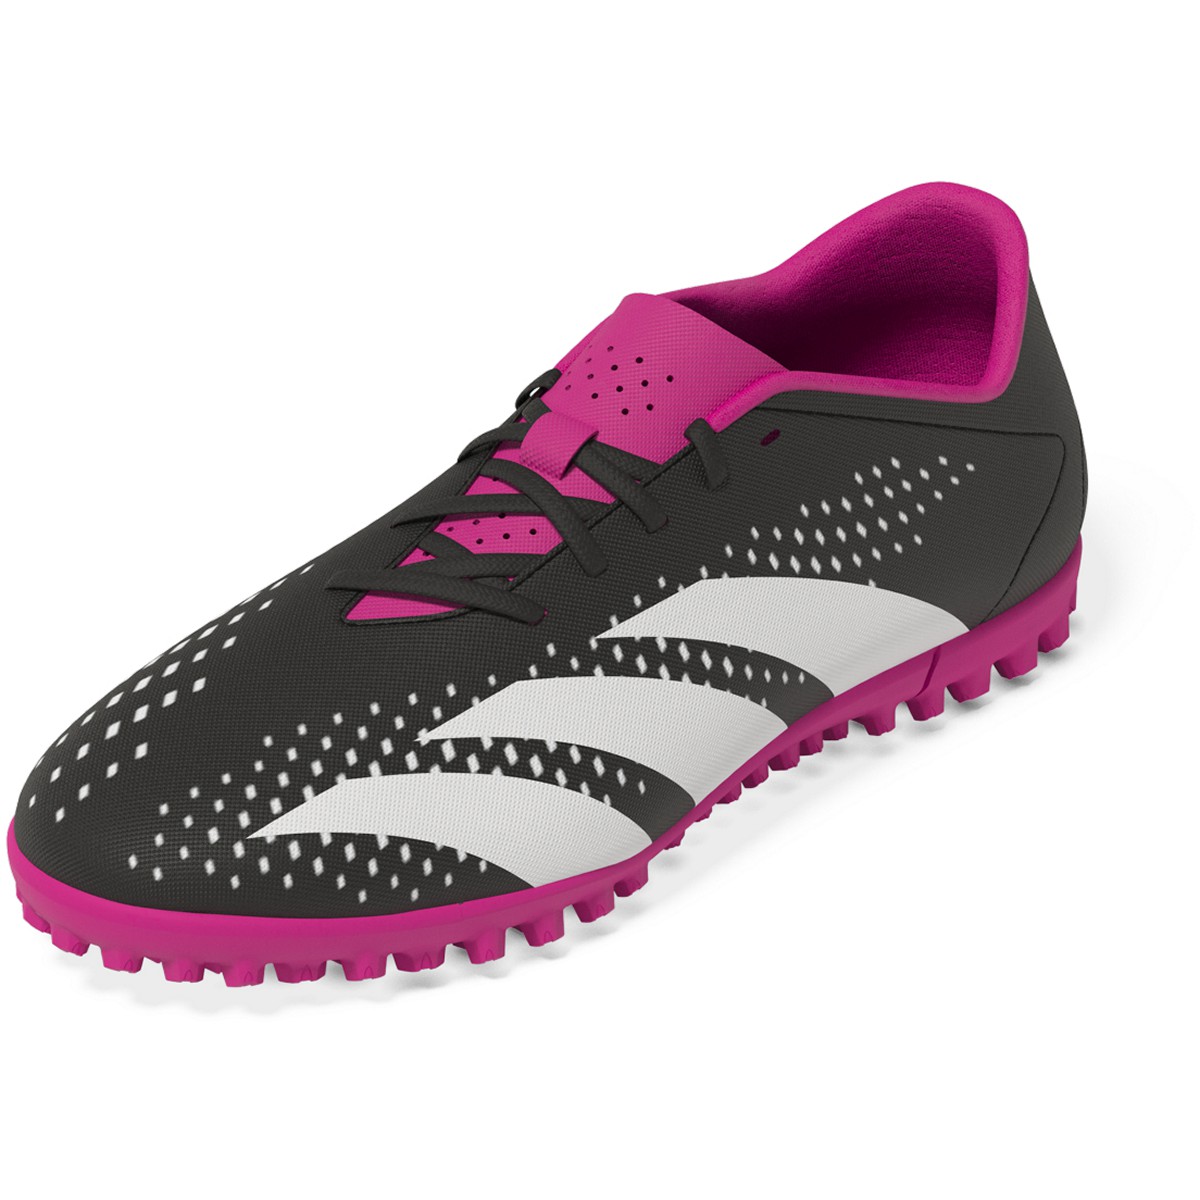 | adidas USA Soccer Predator Core TF Pink ACCURACY.4 Soccer Shoes - Youth Black/White/Shock Unlimited